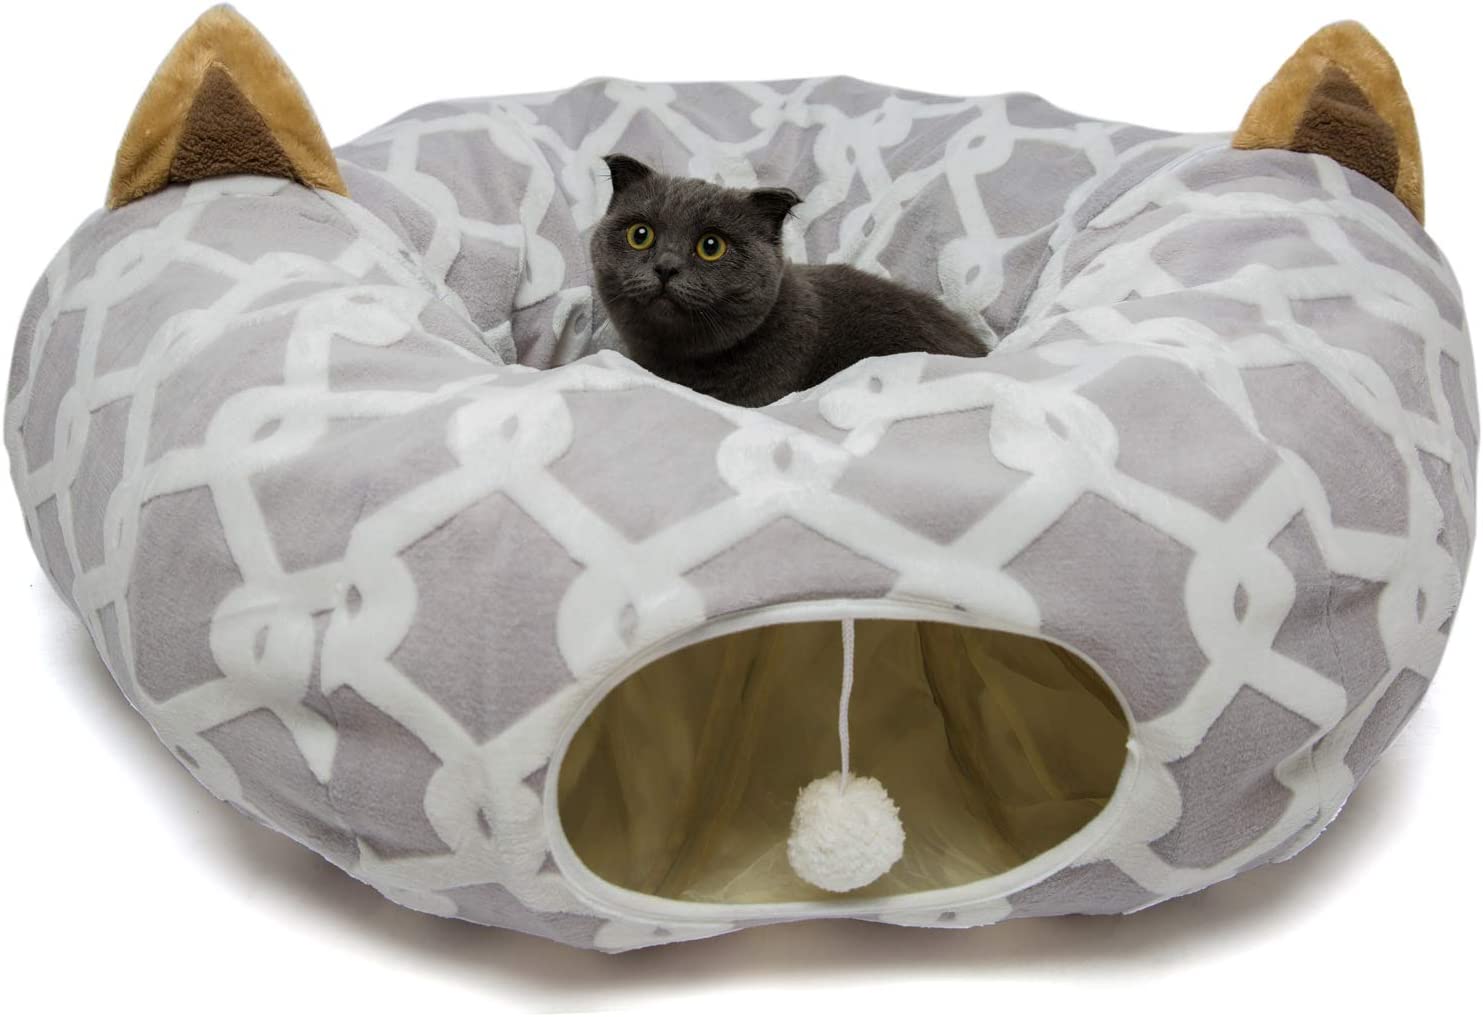 LUCKITTY Large Cat Tunnel Bed with Plush Cover,Fluffy Toy Balls, Small Cushion and Flexible Design- 10 inch Diameter, 3 ft Length- Great for Cats, and Small Dogs, Gray Geometric Figure